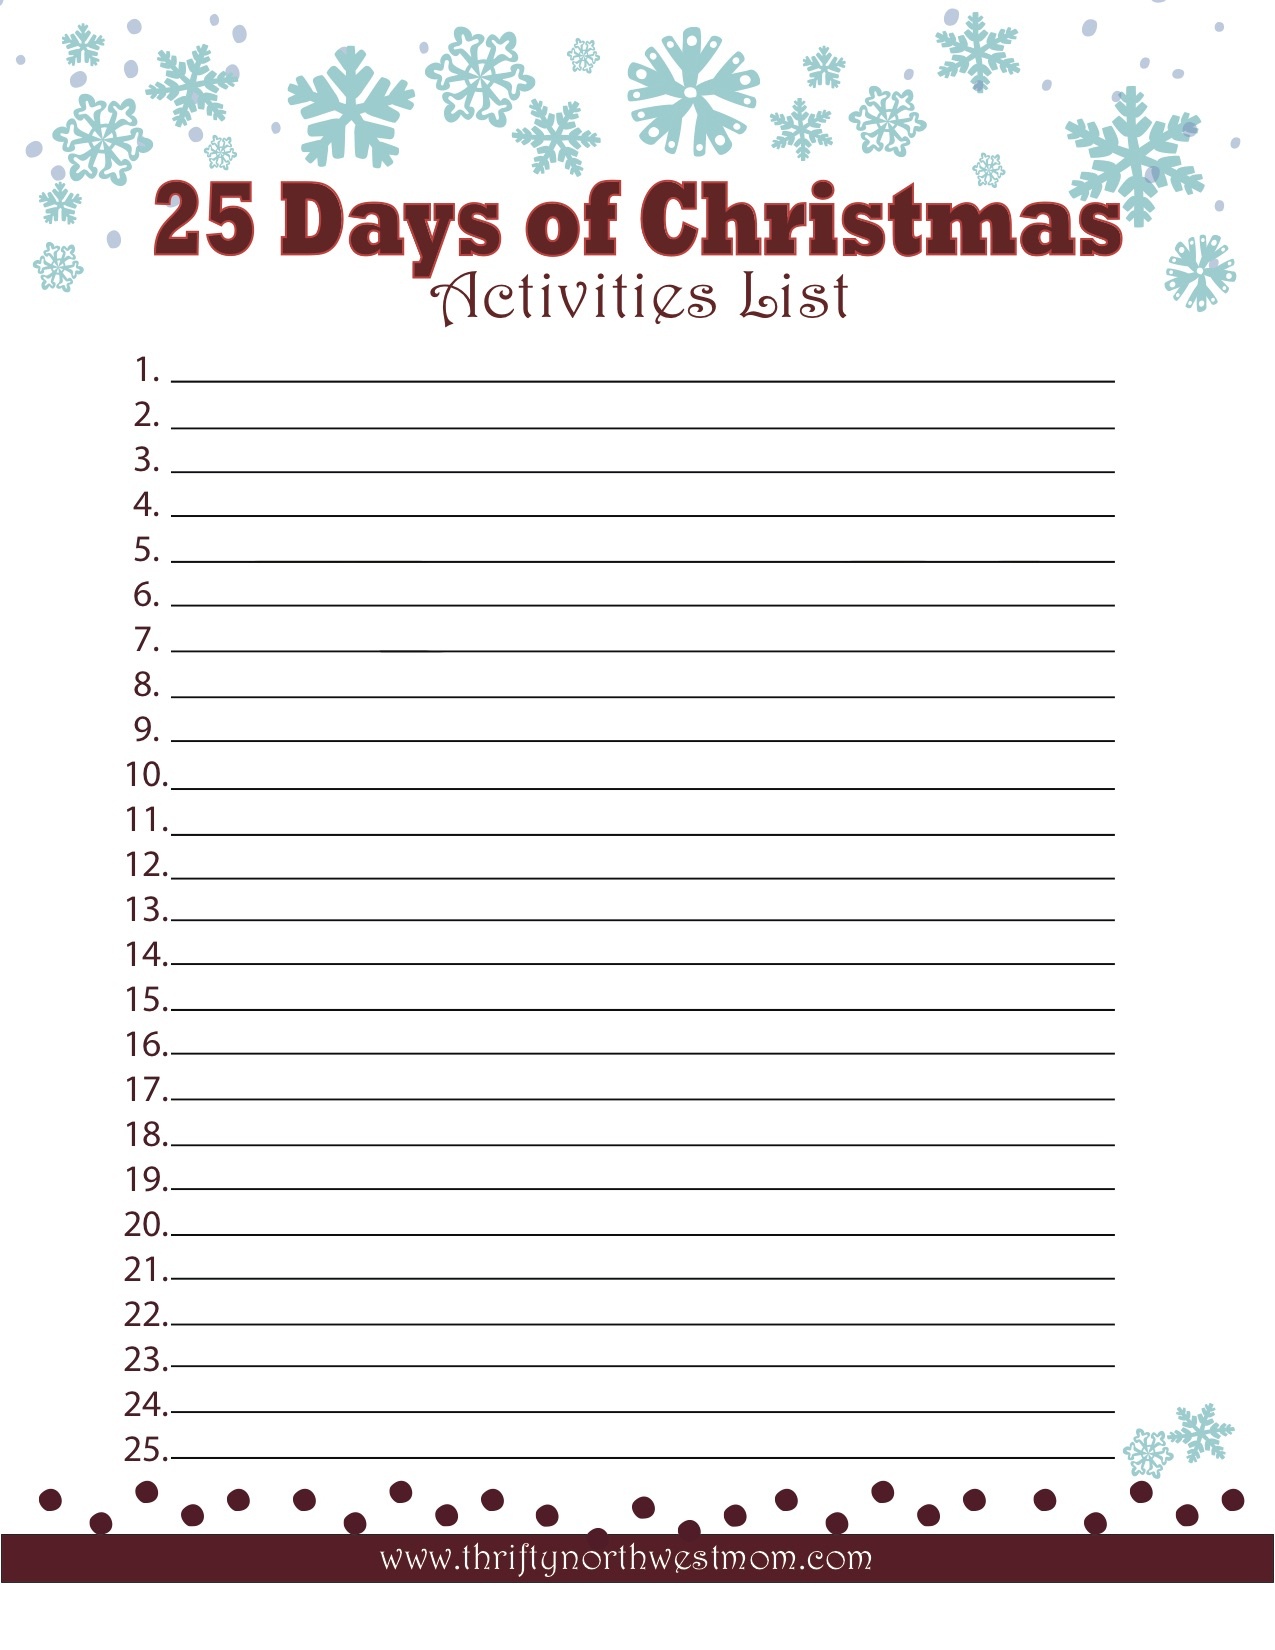 Celebrating The 25 Days Of Christmas ~ Activities List - Christmas - Free Online Printable Christmas Games For Adults